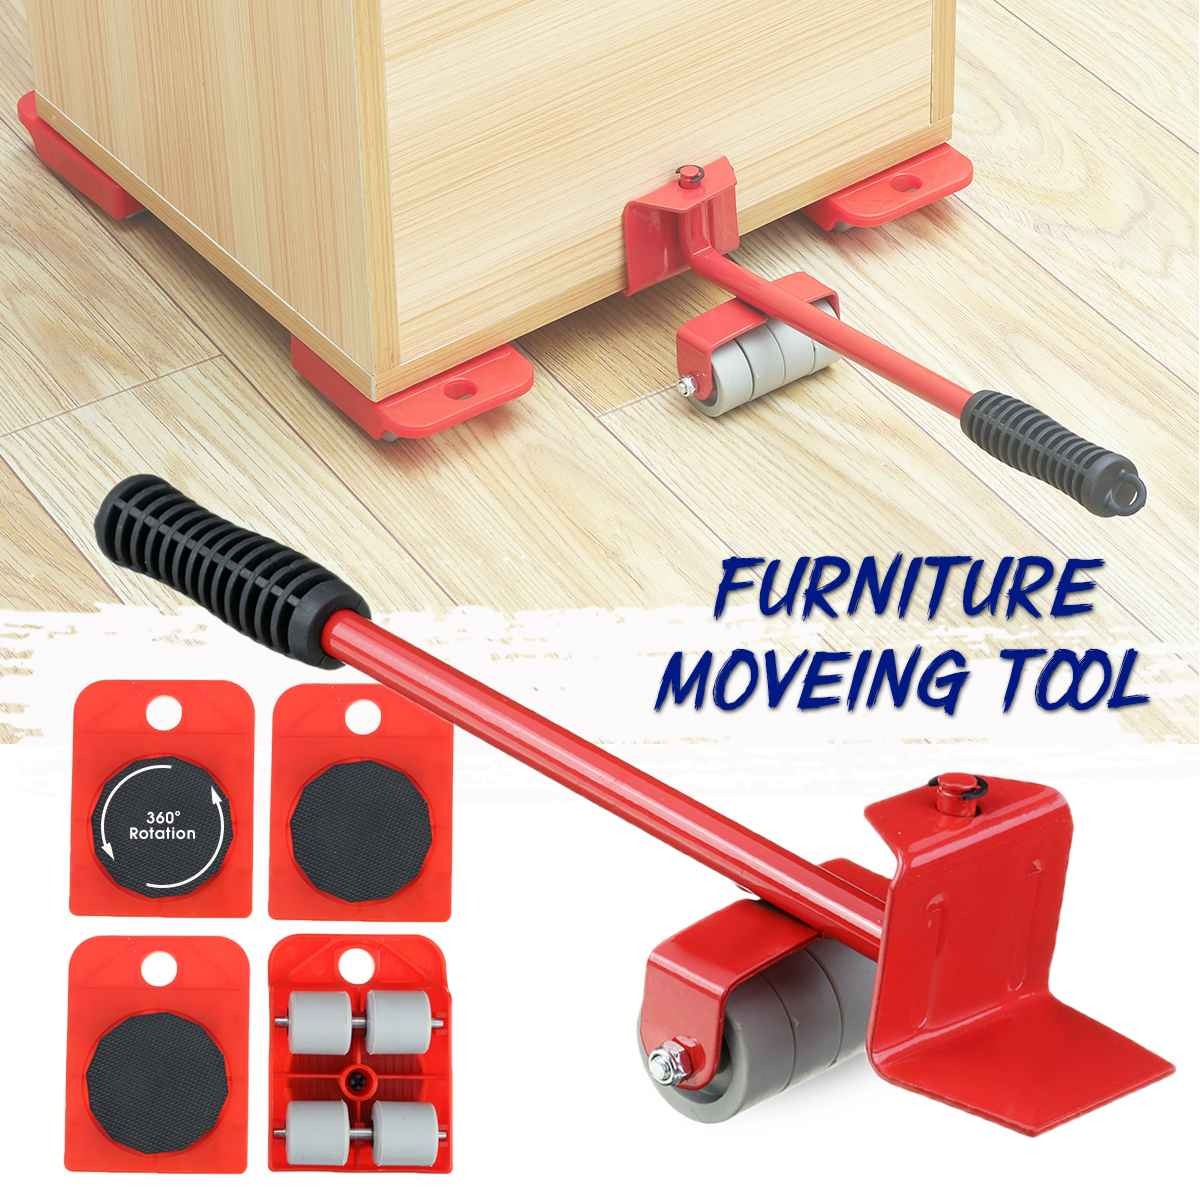 Heavy Furniture Lifter & Mover Tool